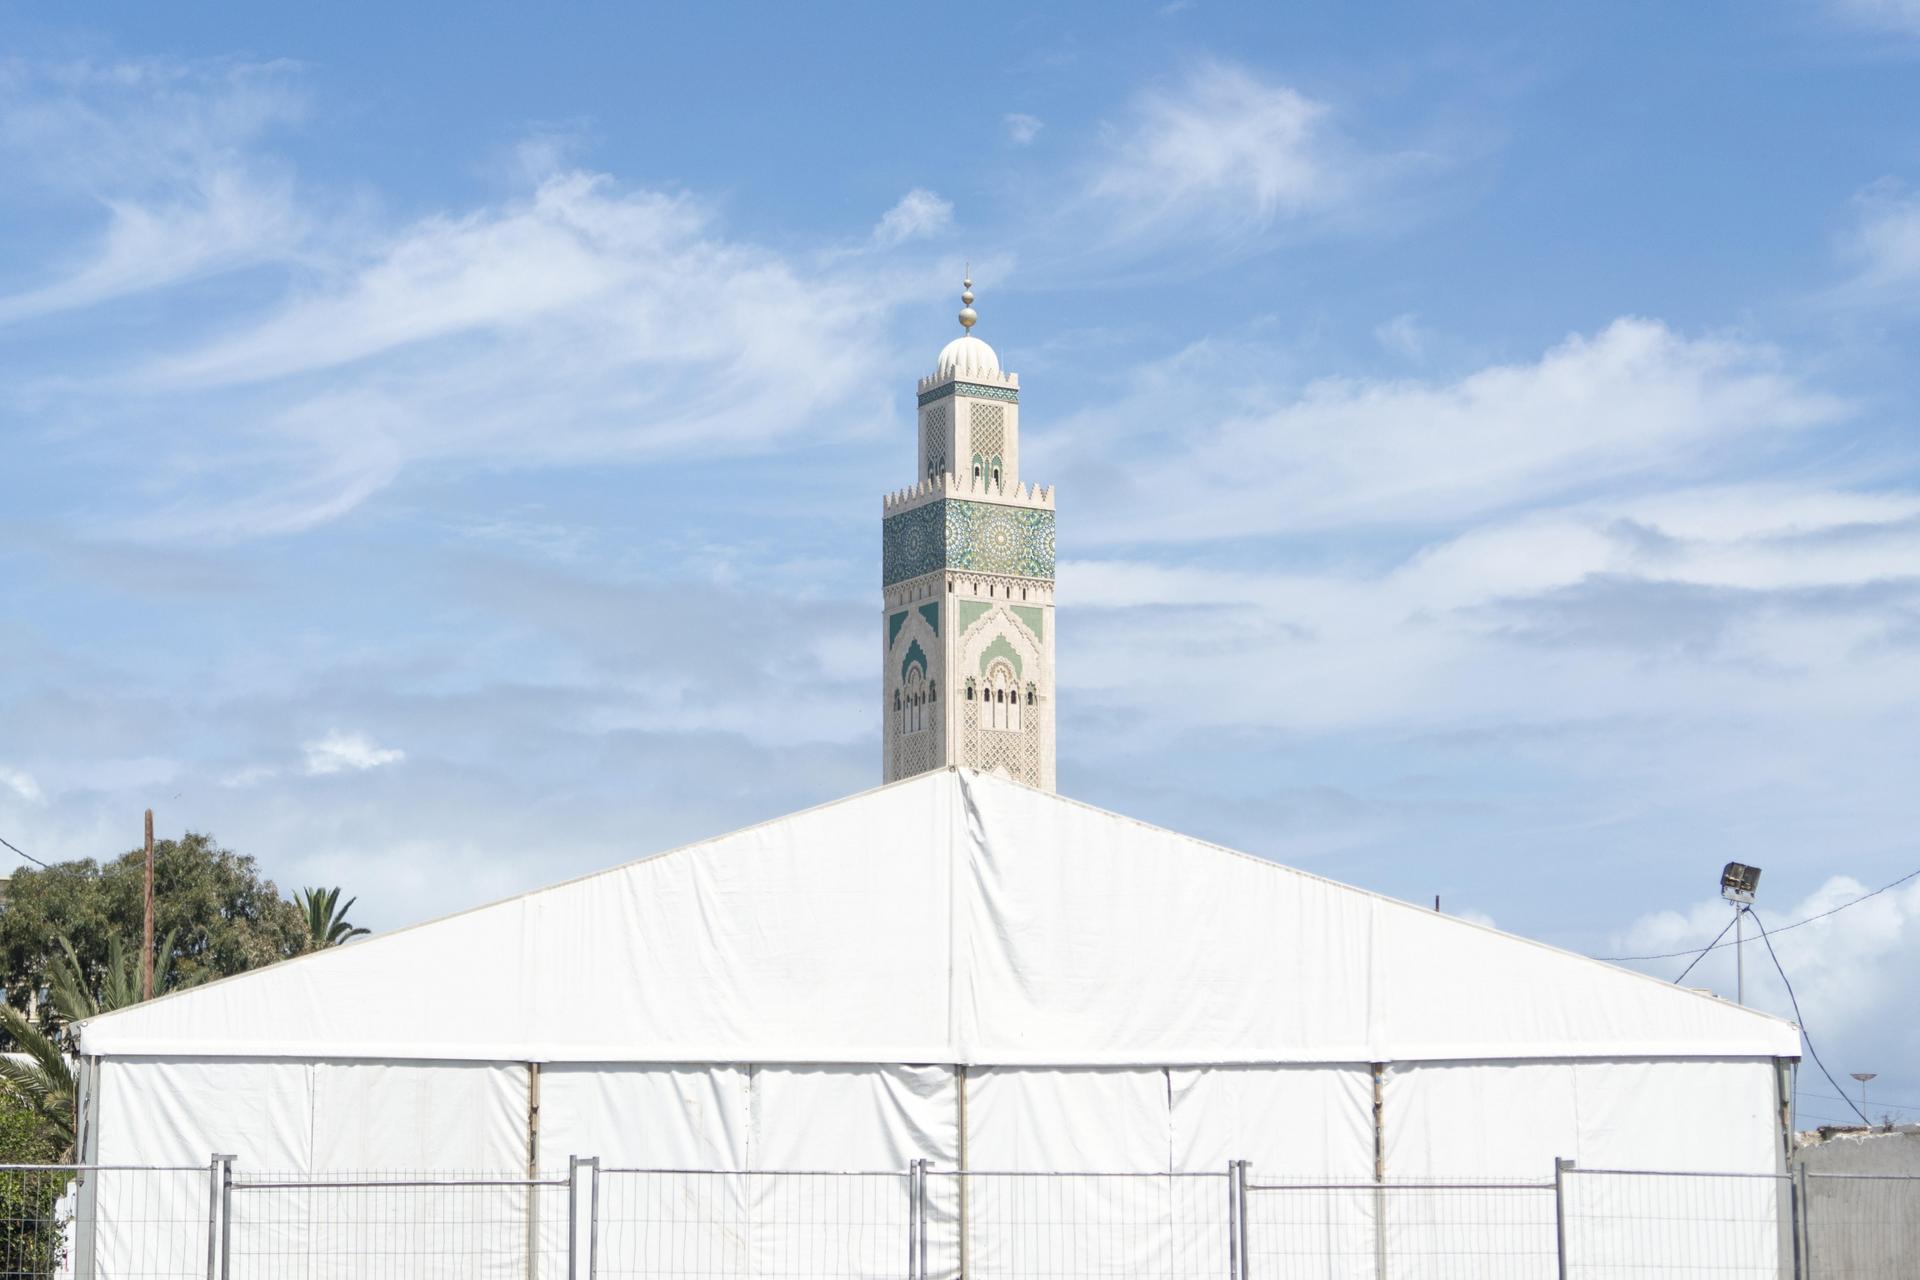 Authorities erected this tent for homeless people needing services during the lockdown. Behind it rises the minaret of the Hassan II mosque, which is now closed. Usually, Hassan II, Africa’s biggest mosque, gets as many as 200,000 worshipers nightly durin